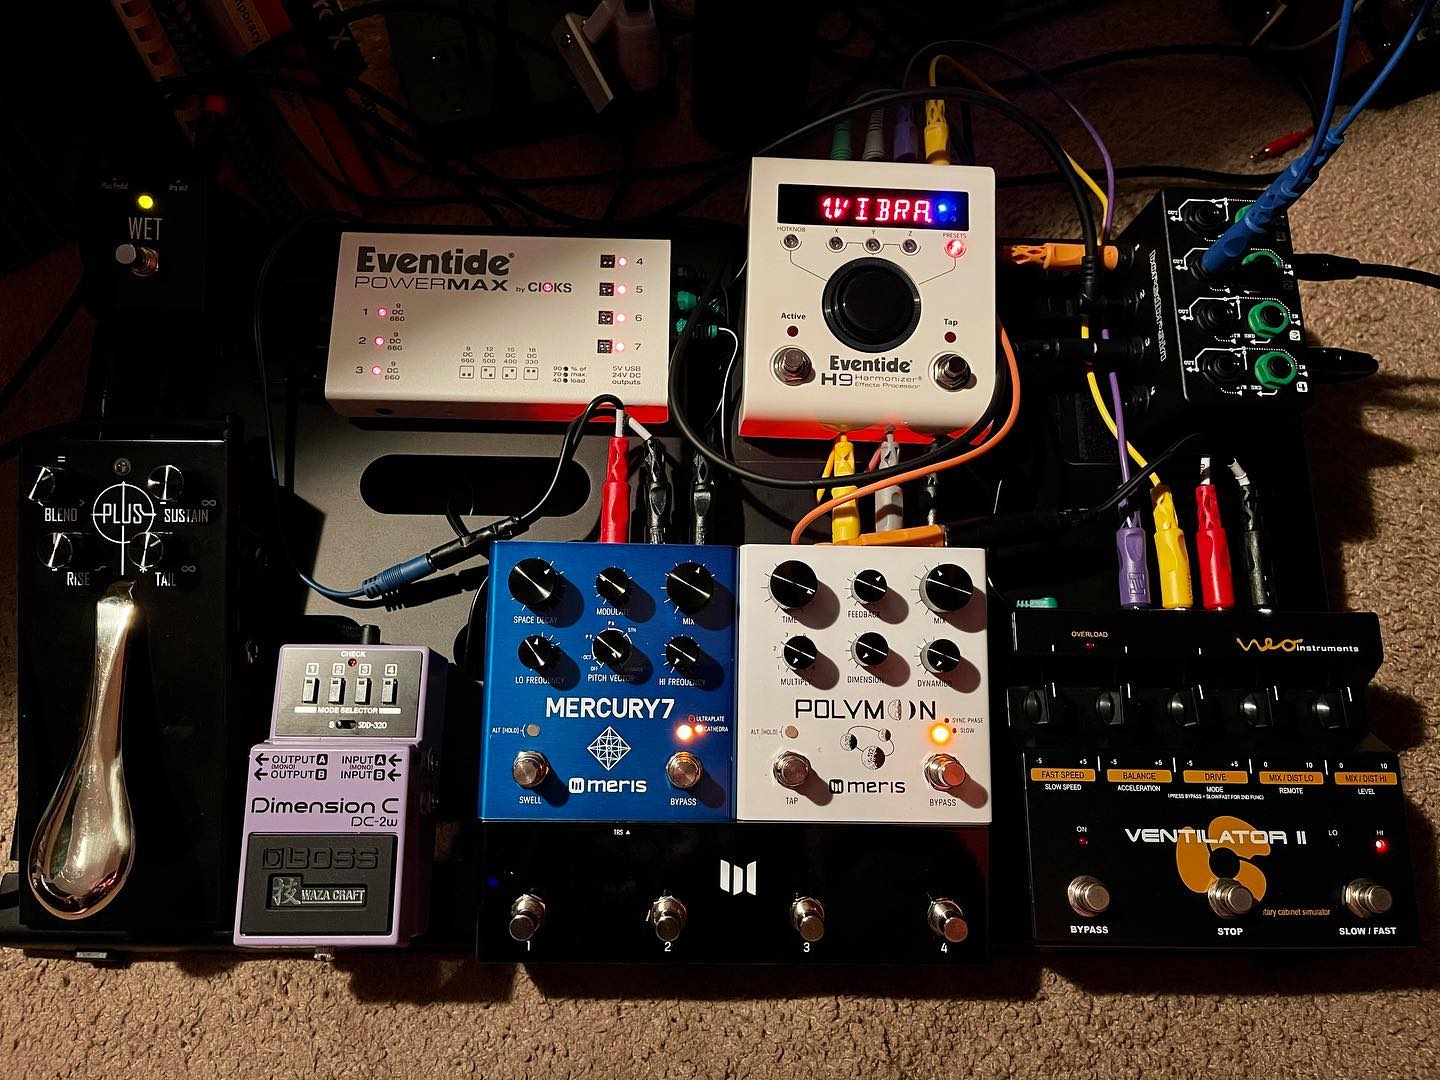 Just put together a new pedalboard